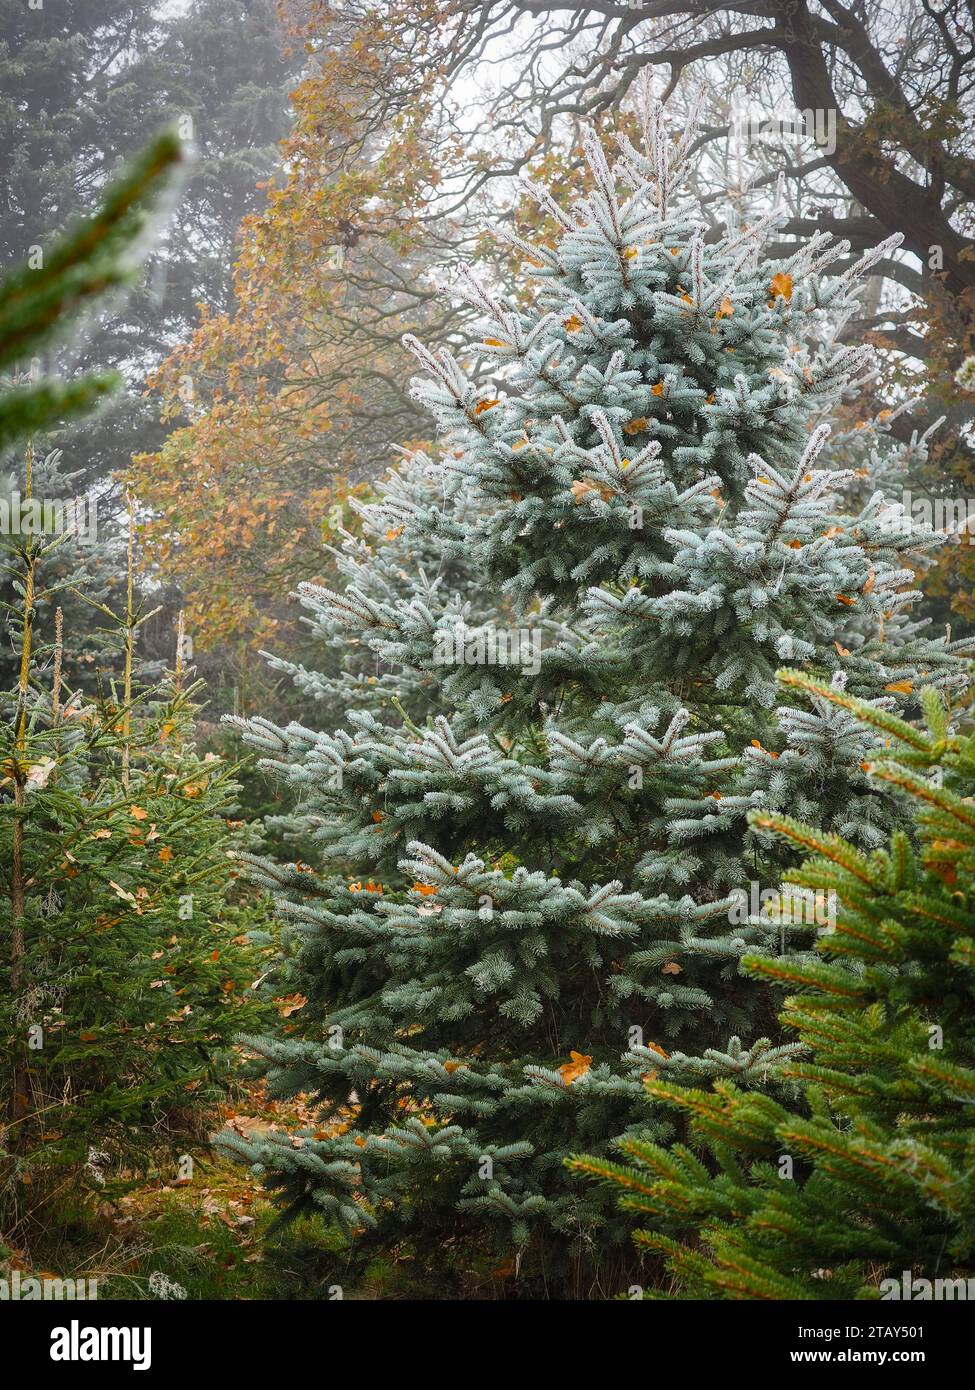 Beautiful frost-covered evergreen conifer on a sunny winter day in the British countryside surrounded by autumn coloured trees and fallen leaves Stock Photo